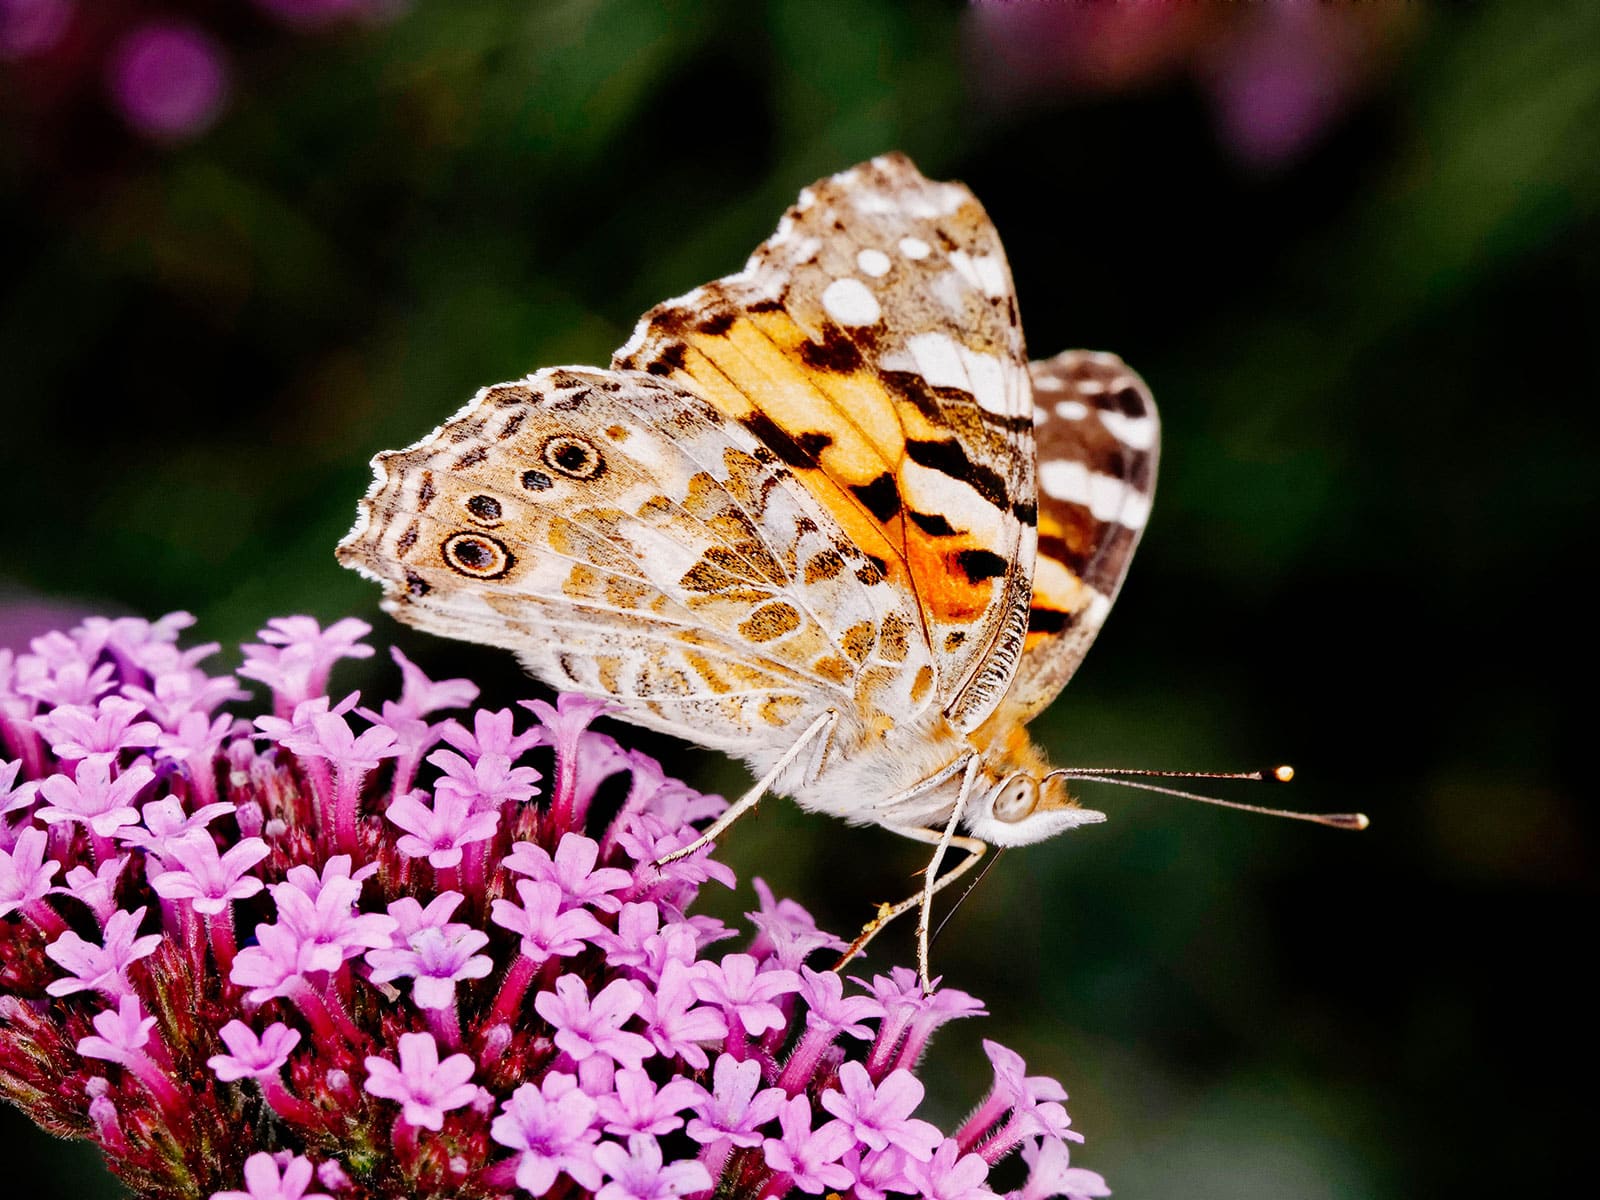 Painted lady butterfly standing on pink flower cluster with its wings folded up